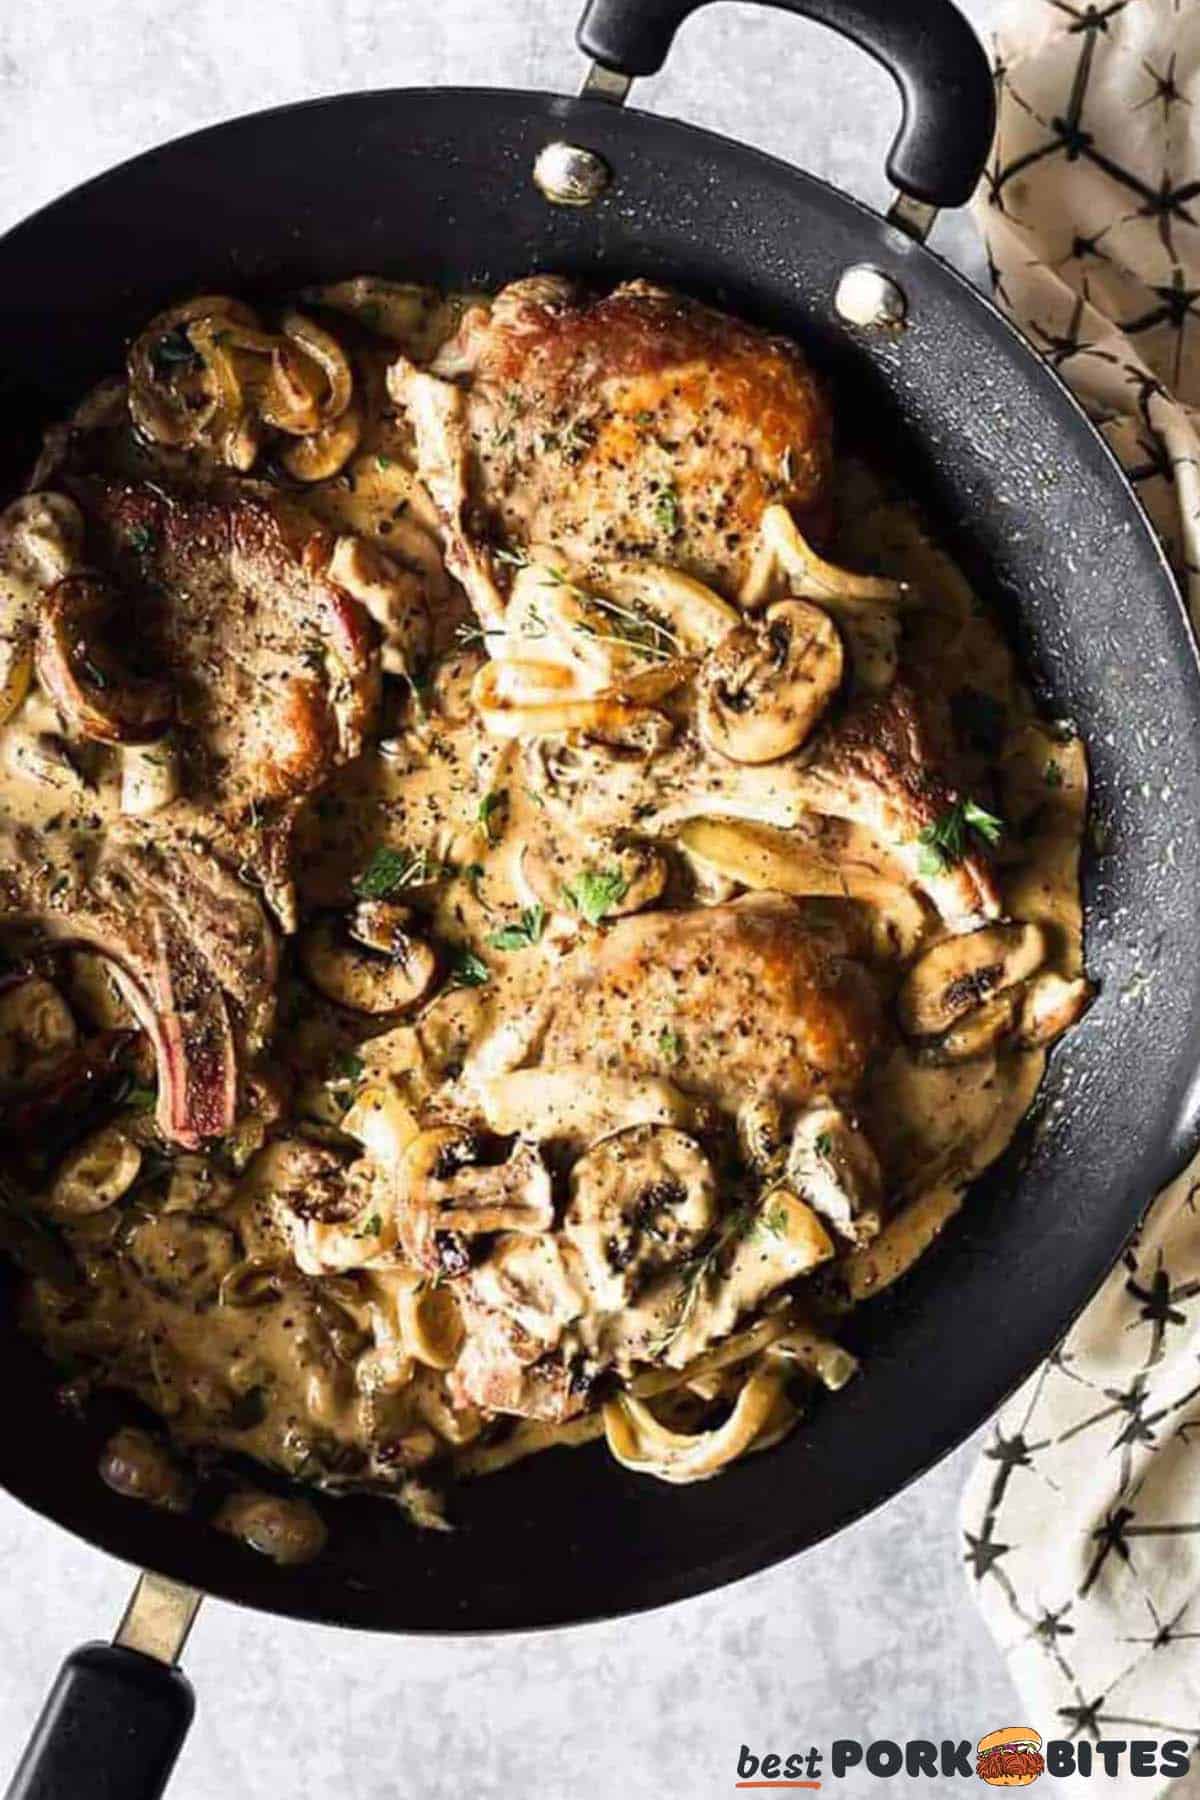 pork chops smothered with mushrooms in a black skillet with herbs